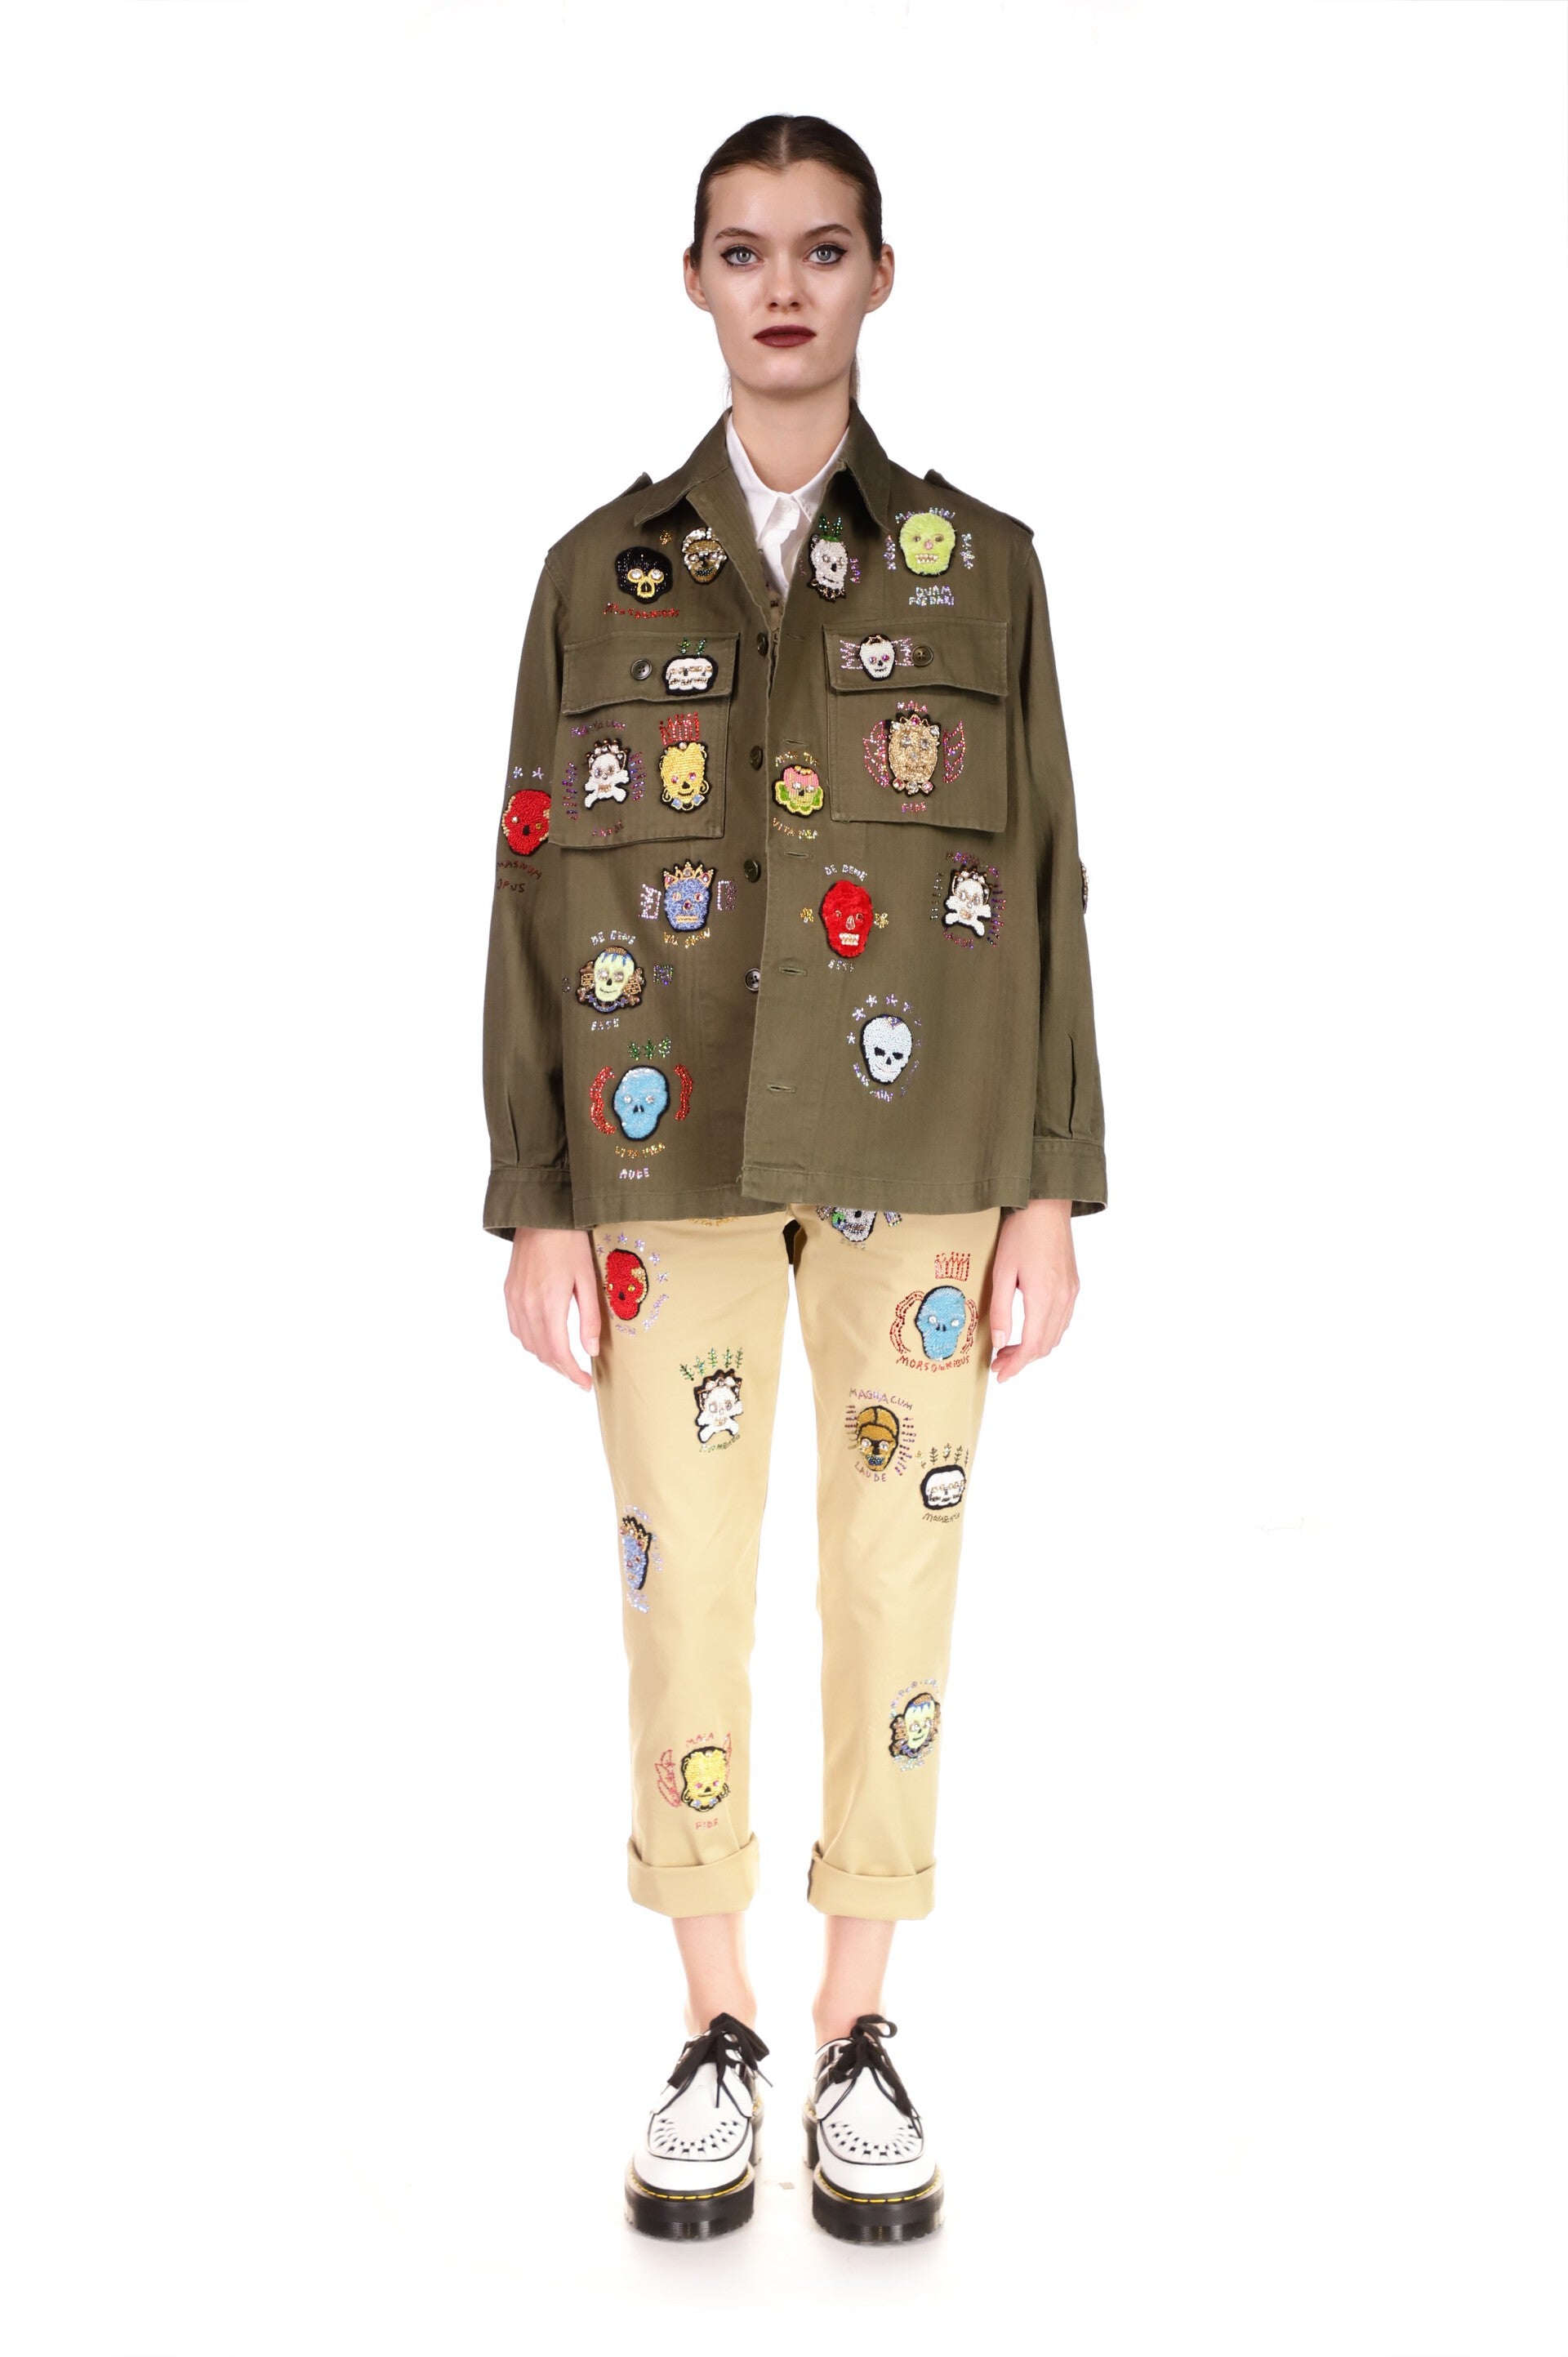 'WE ARE MADE OF STARS' VINTAGE FRENCH MILITARY JACKET